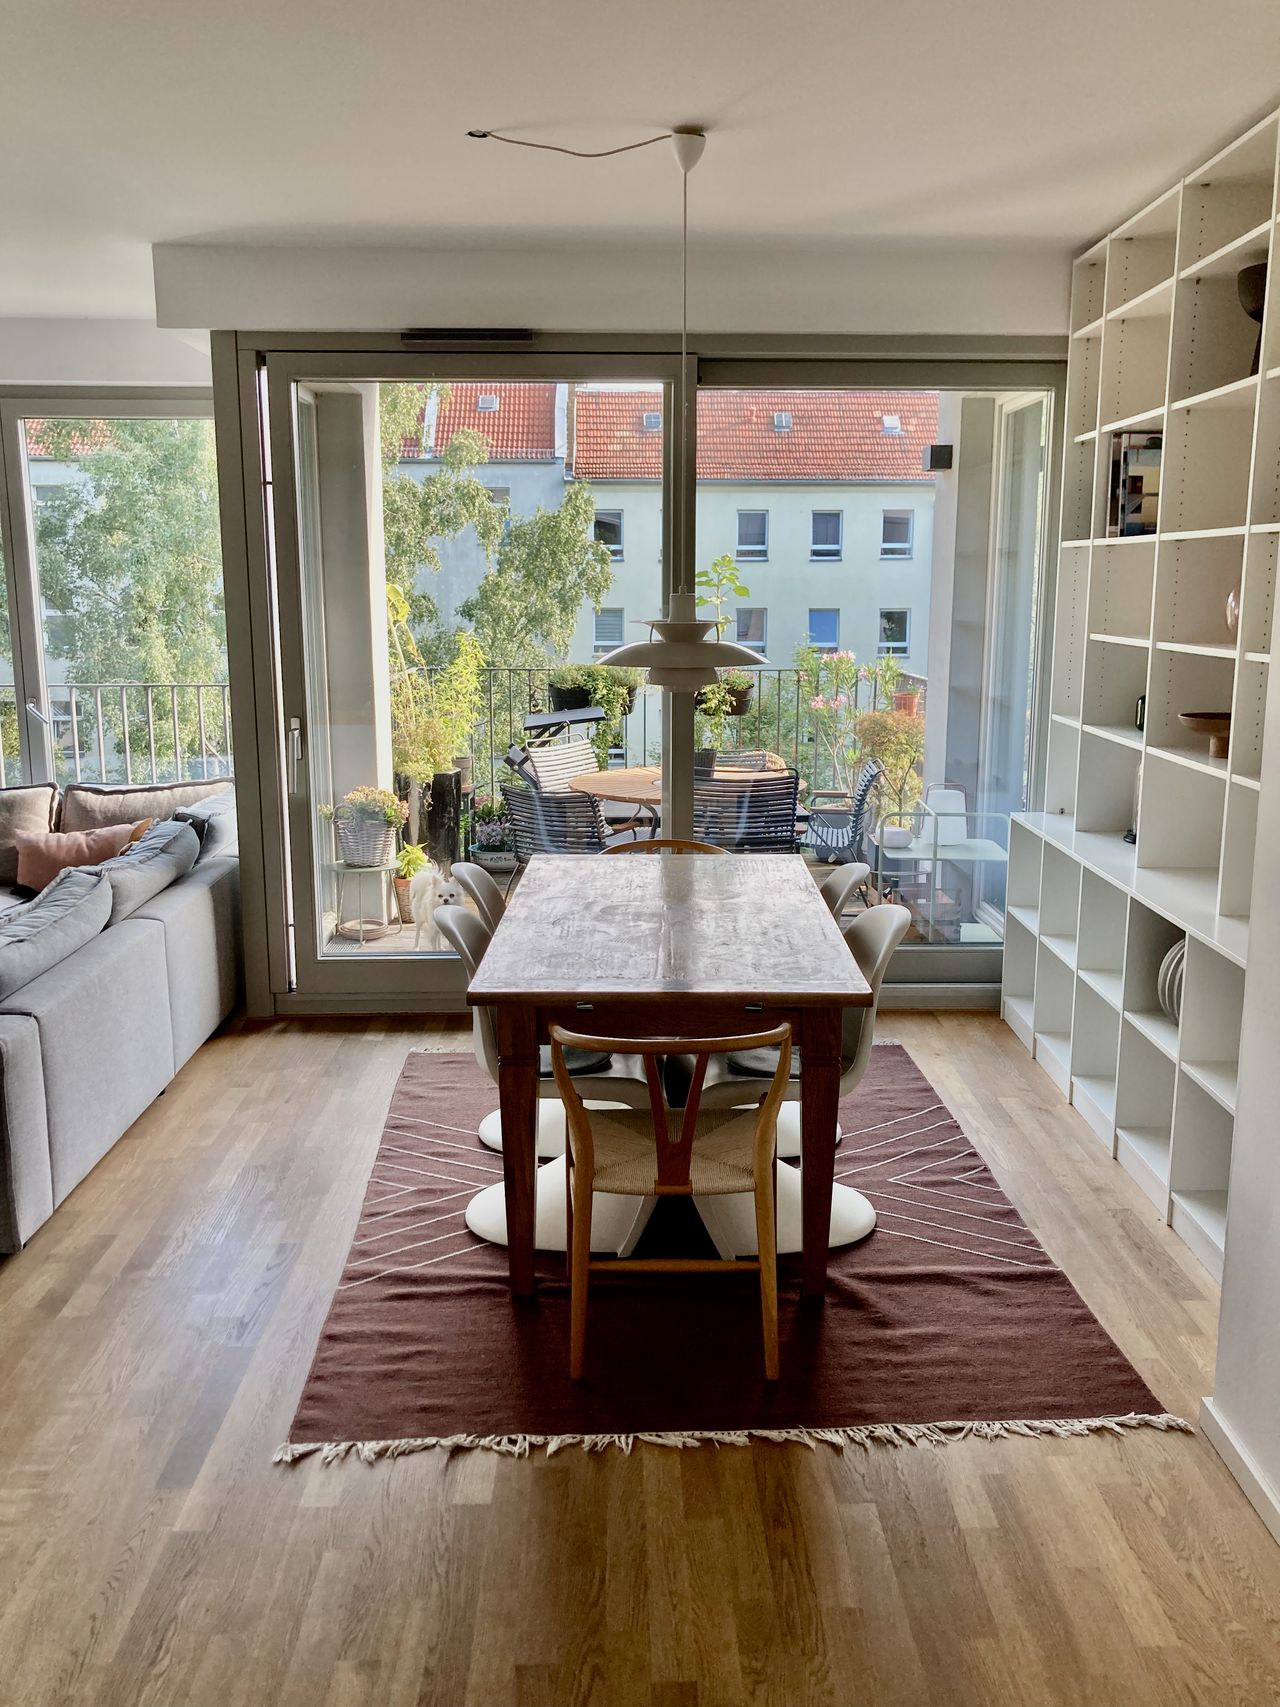 Light-flooded large modern apartment in Pankow - Prenzlauer Berg border - large south-facing balcony/loggia - 400 sqm community garden